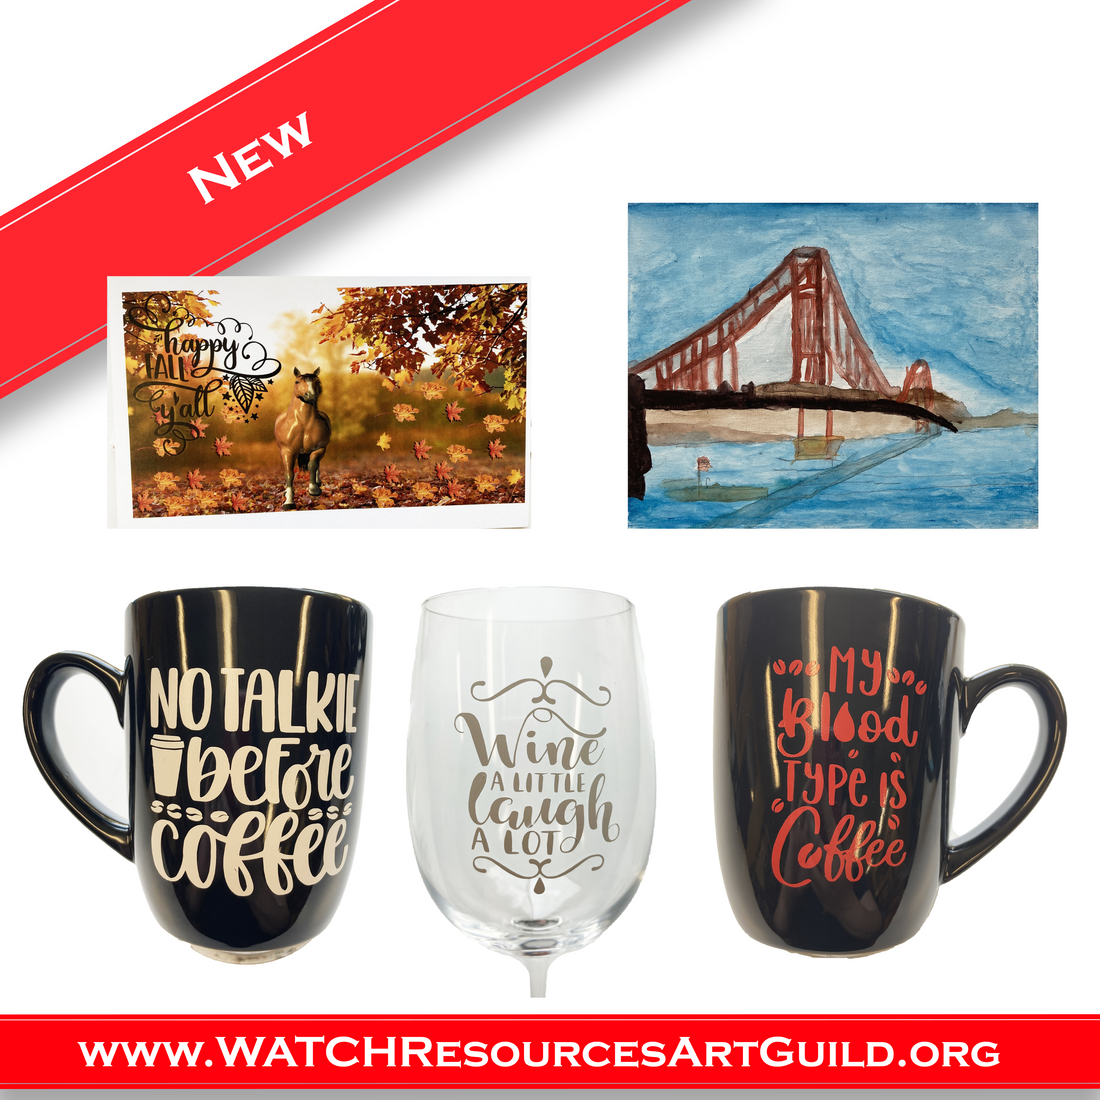 WATCH Resources Art Guild - July 2021 New